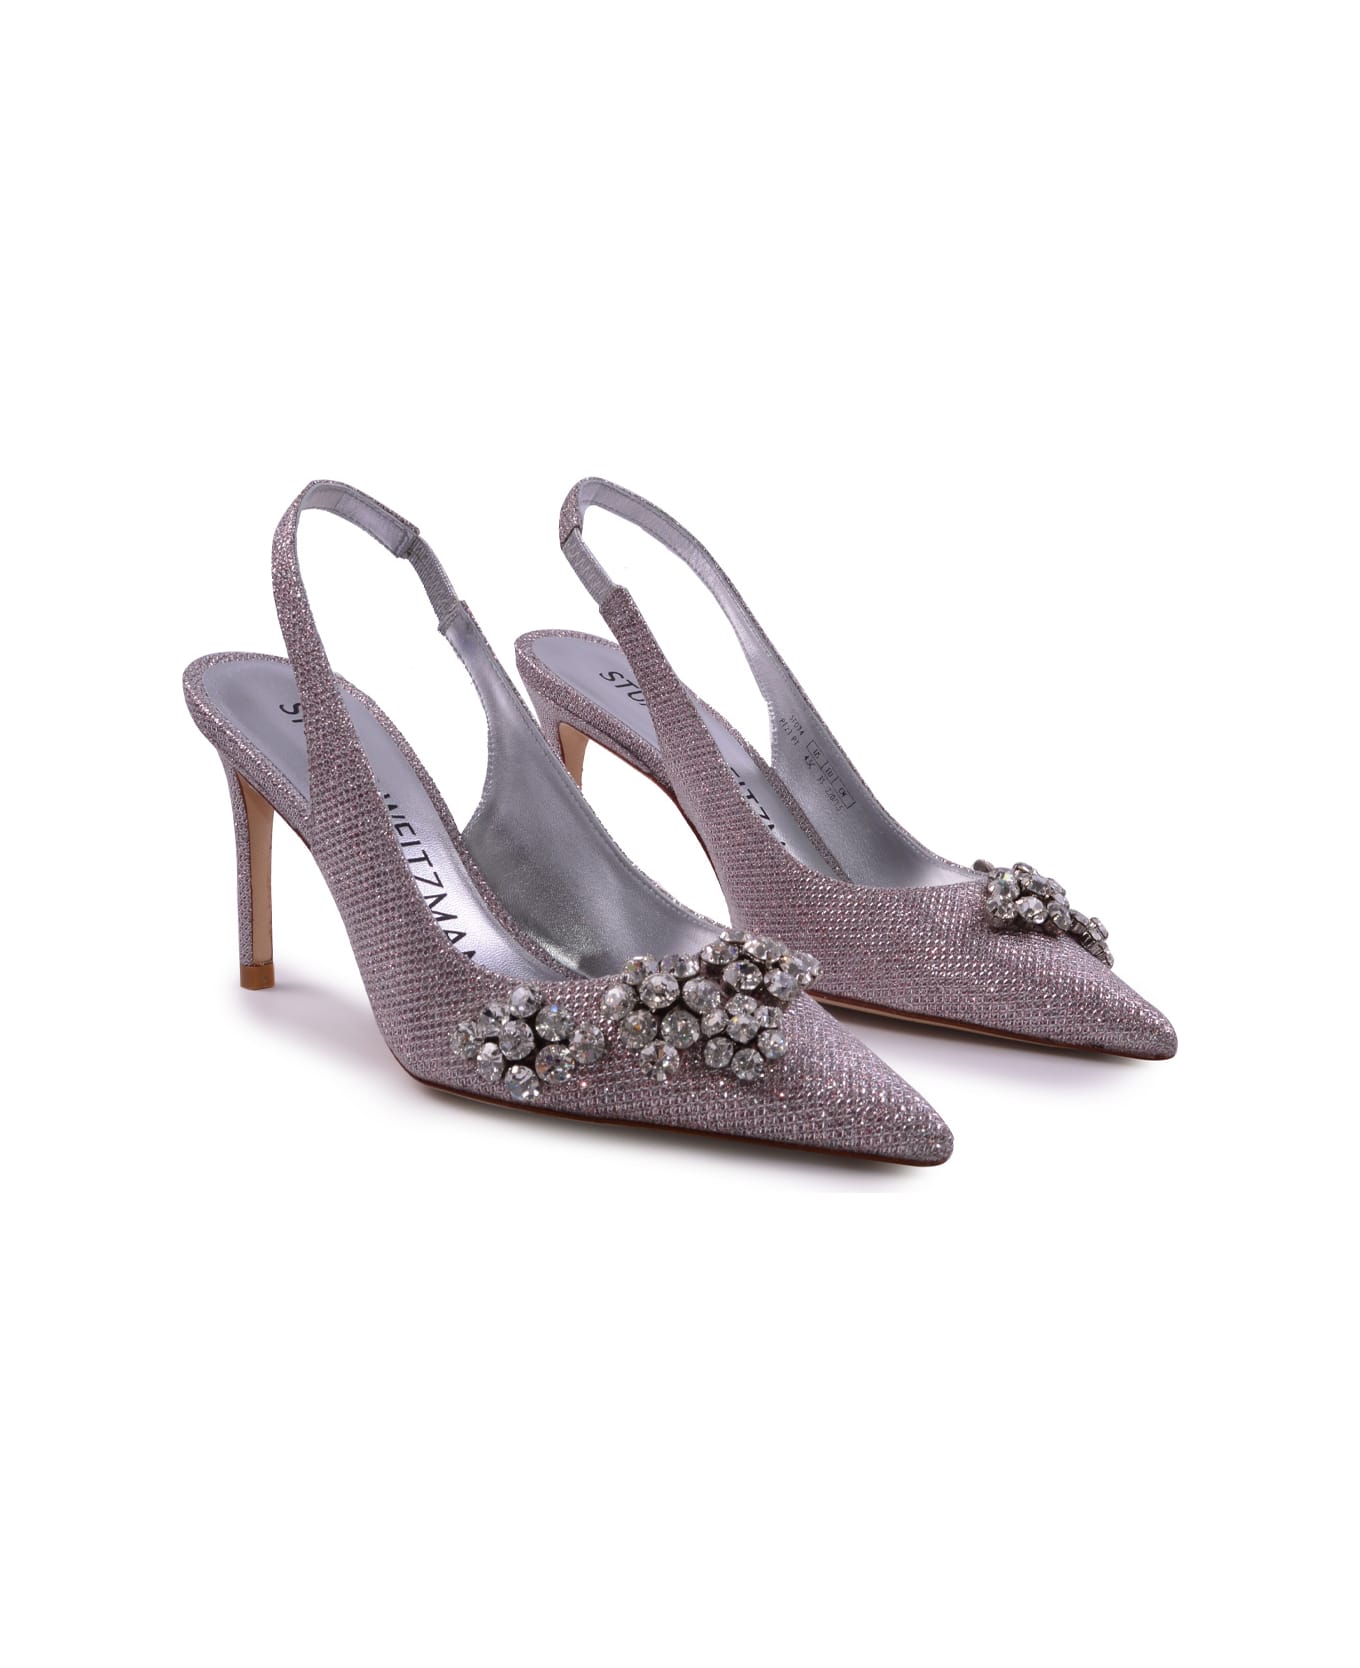 Stuart Weitzman Shoes With Heels And Crystals - Pink ハイヒール